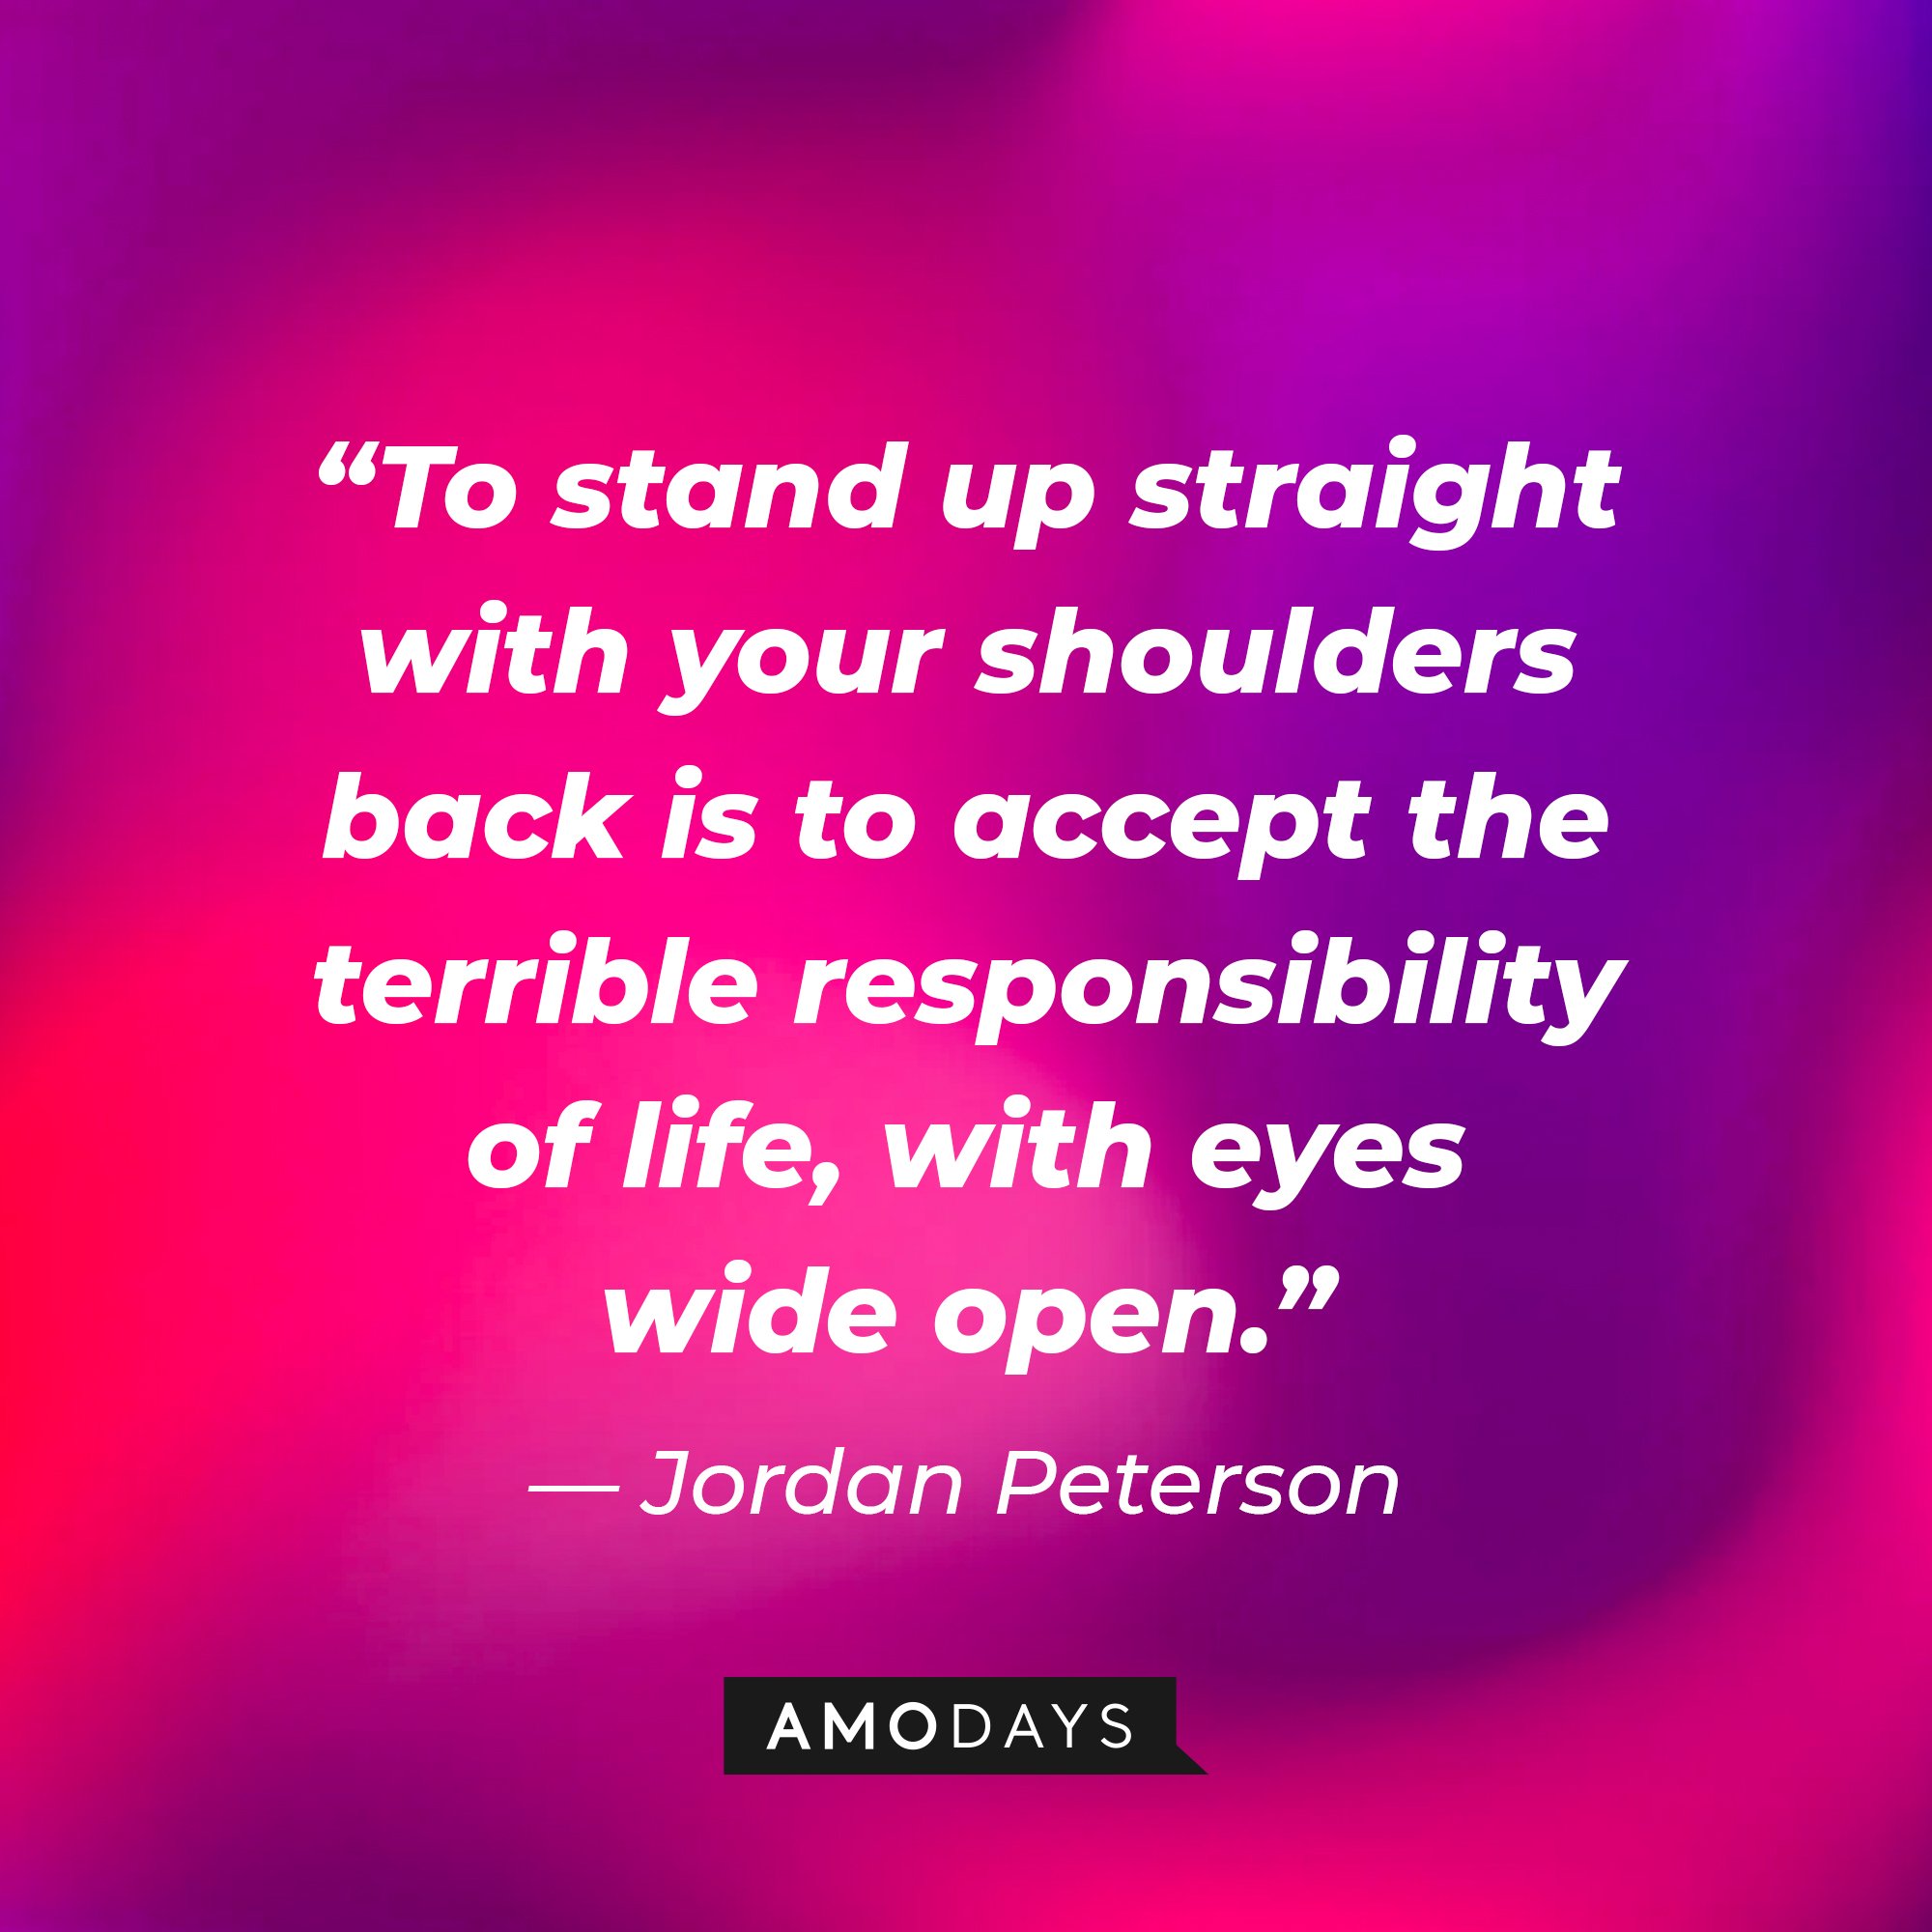 Jordan Peterson's quote: “To stand up straight with your shoulders back is to accept the terrible responsibility of life, with eyes wide open.” | Image: AmoDays